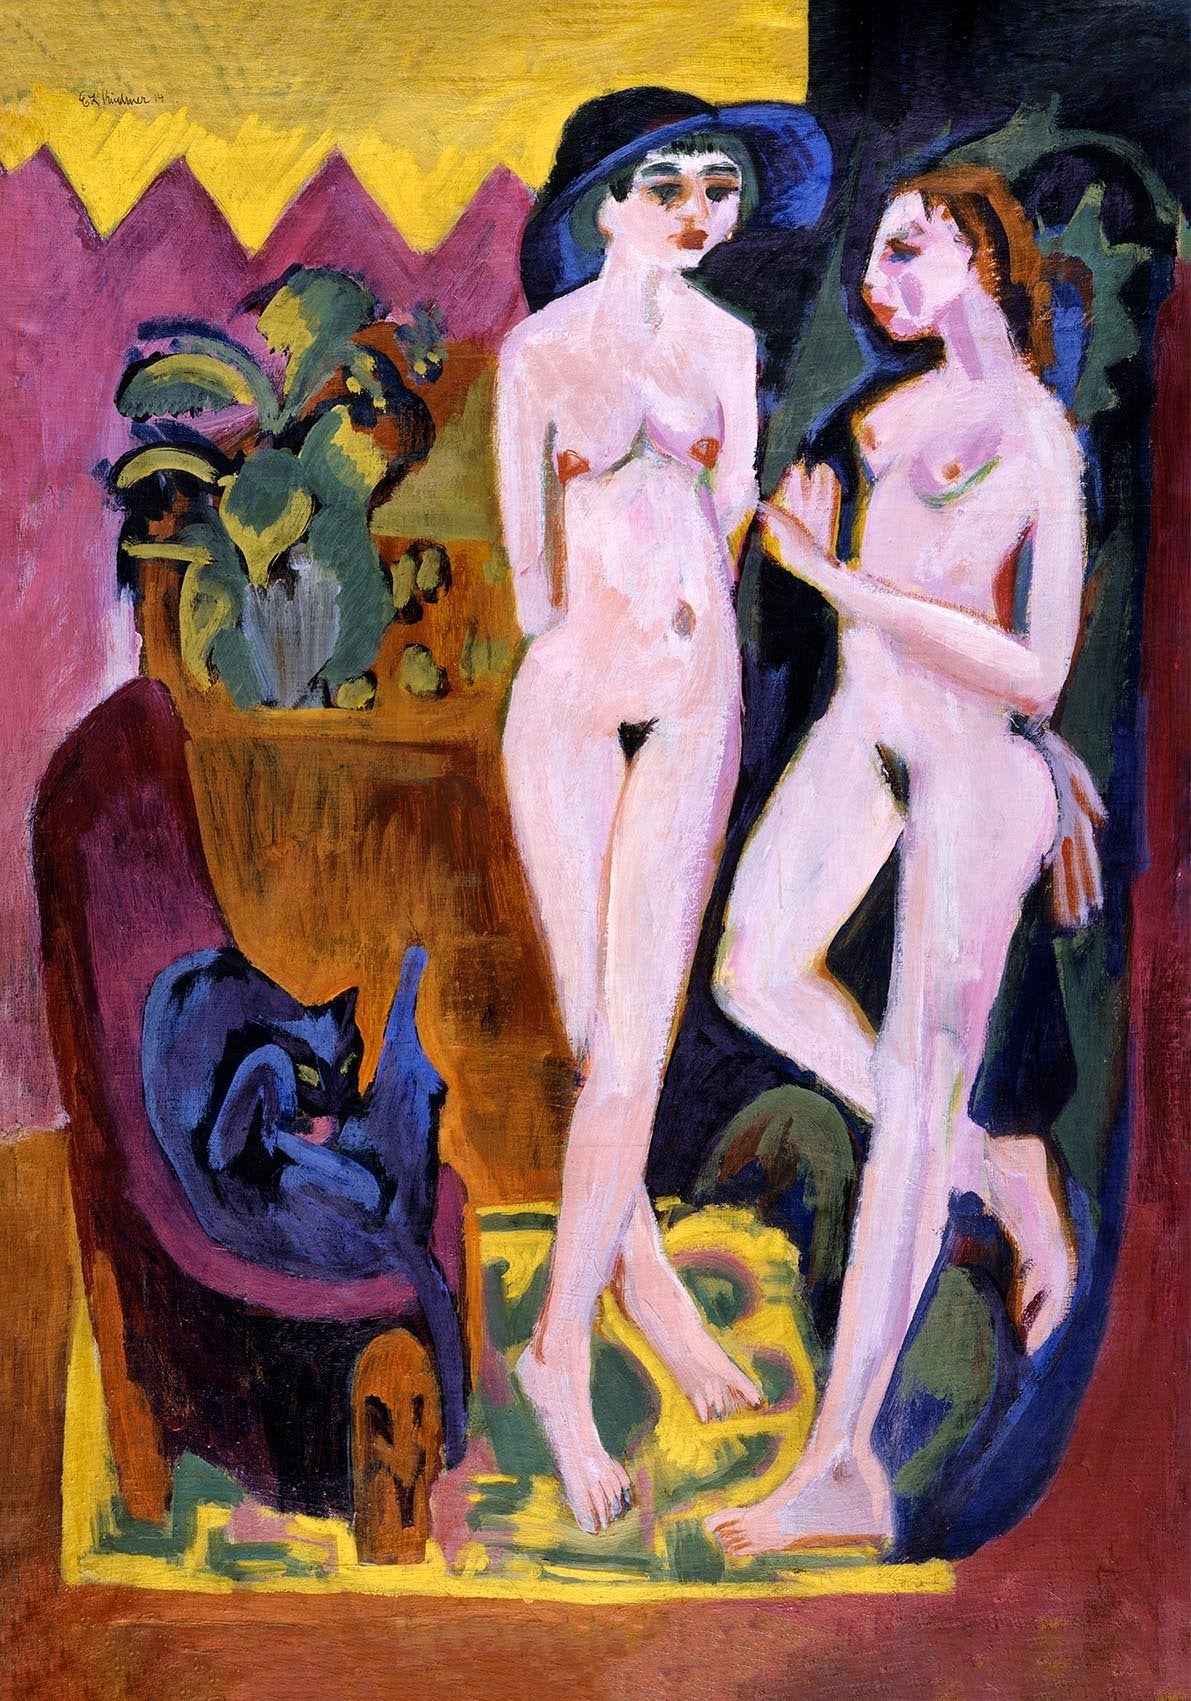 Two Nudes in a Room by Ernst Kirchner